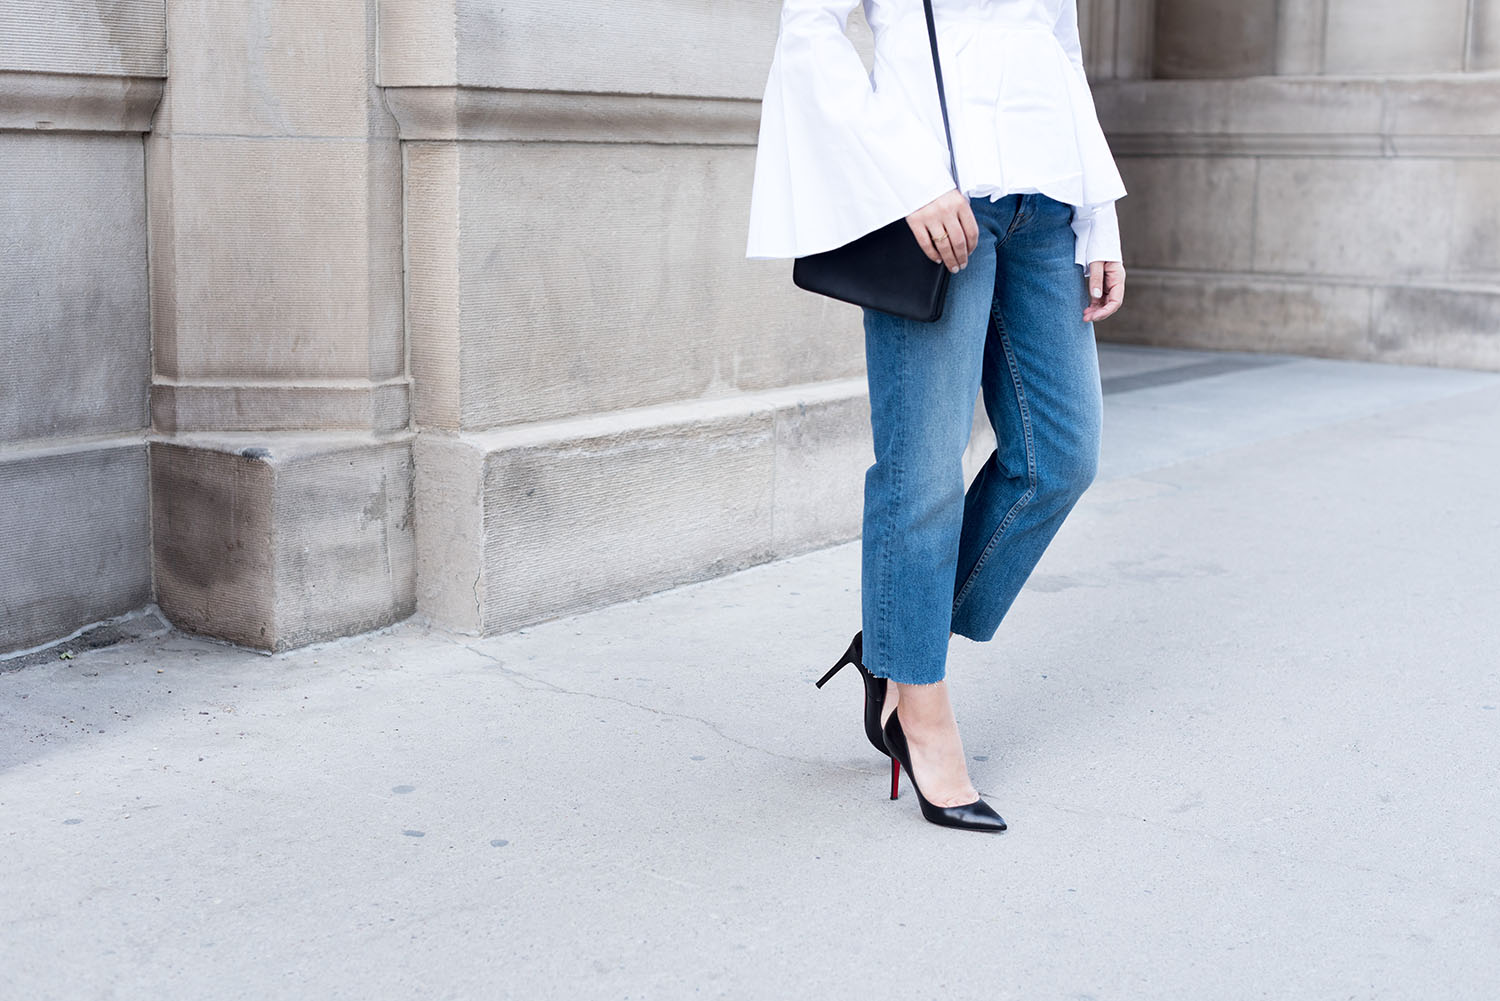 Outfit details on top Winnipeg fashion blogger Cee Fardoe of Coco & Vera, including Grlfrnd Helena jeans and Christian Louboutin Pigalle pumps